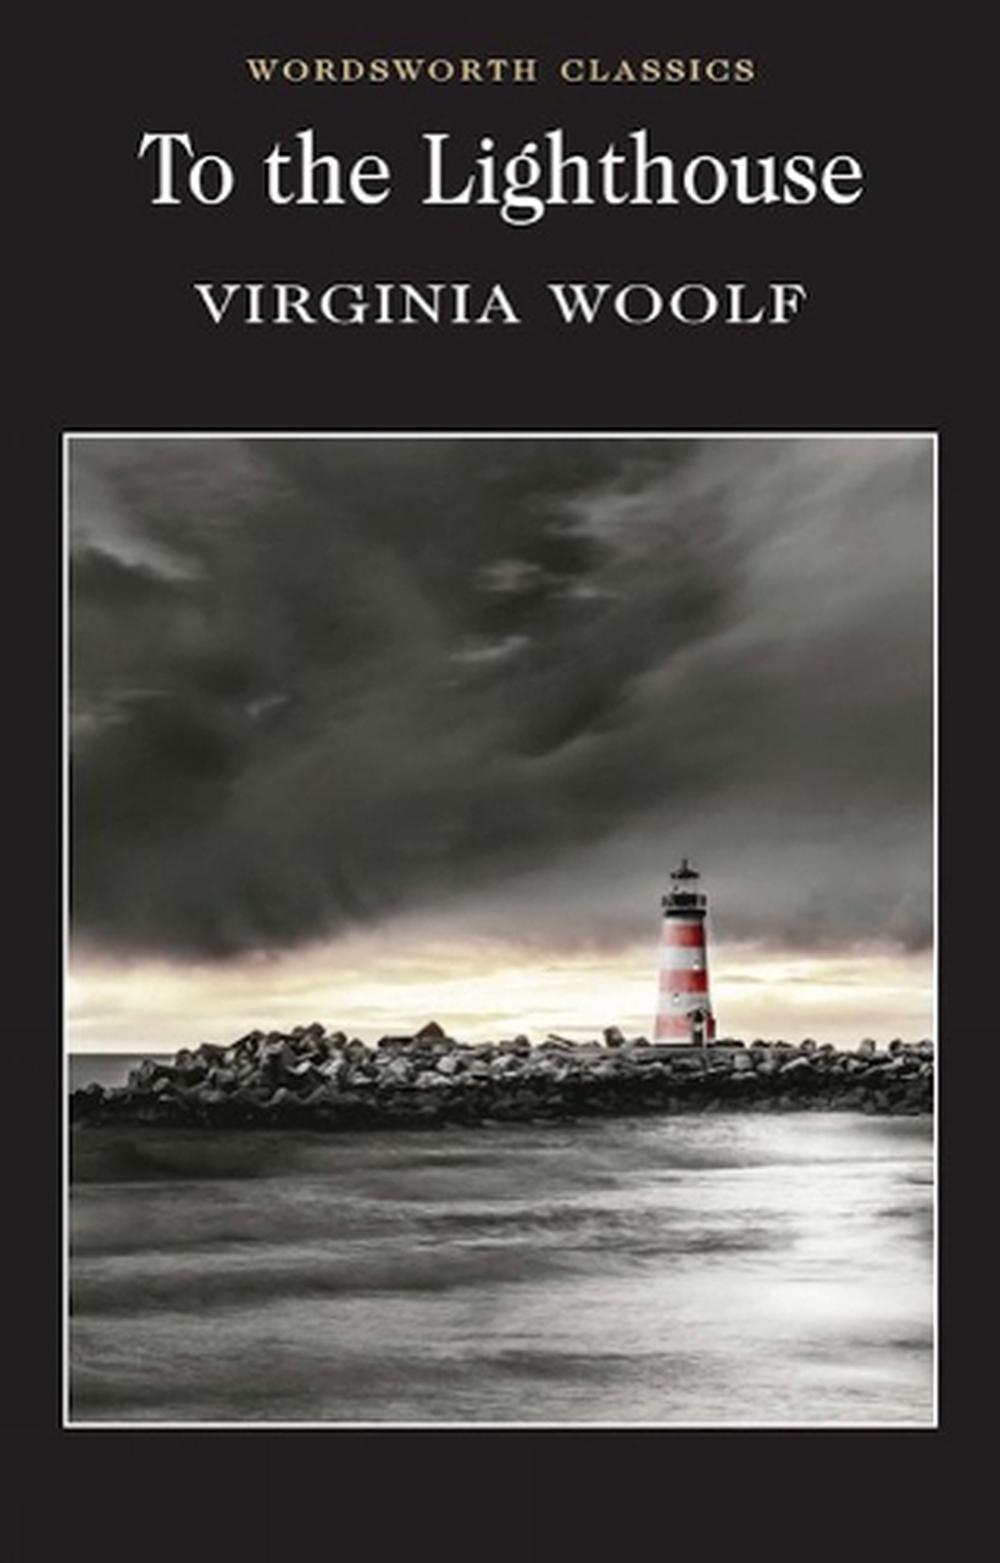 the lighthouse book review